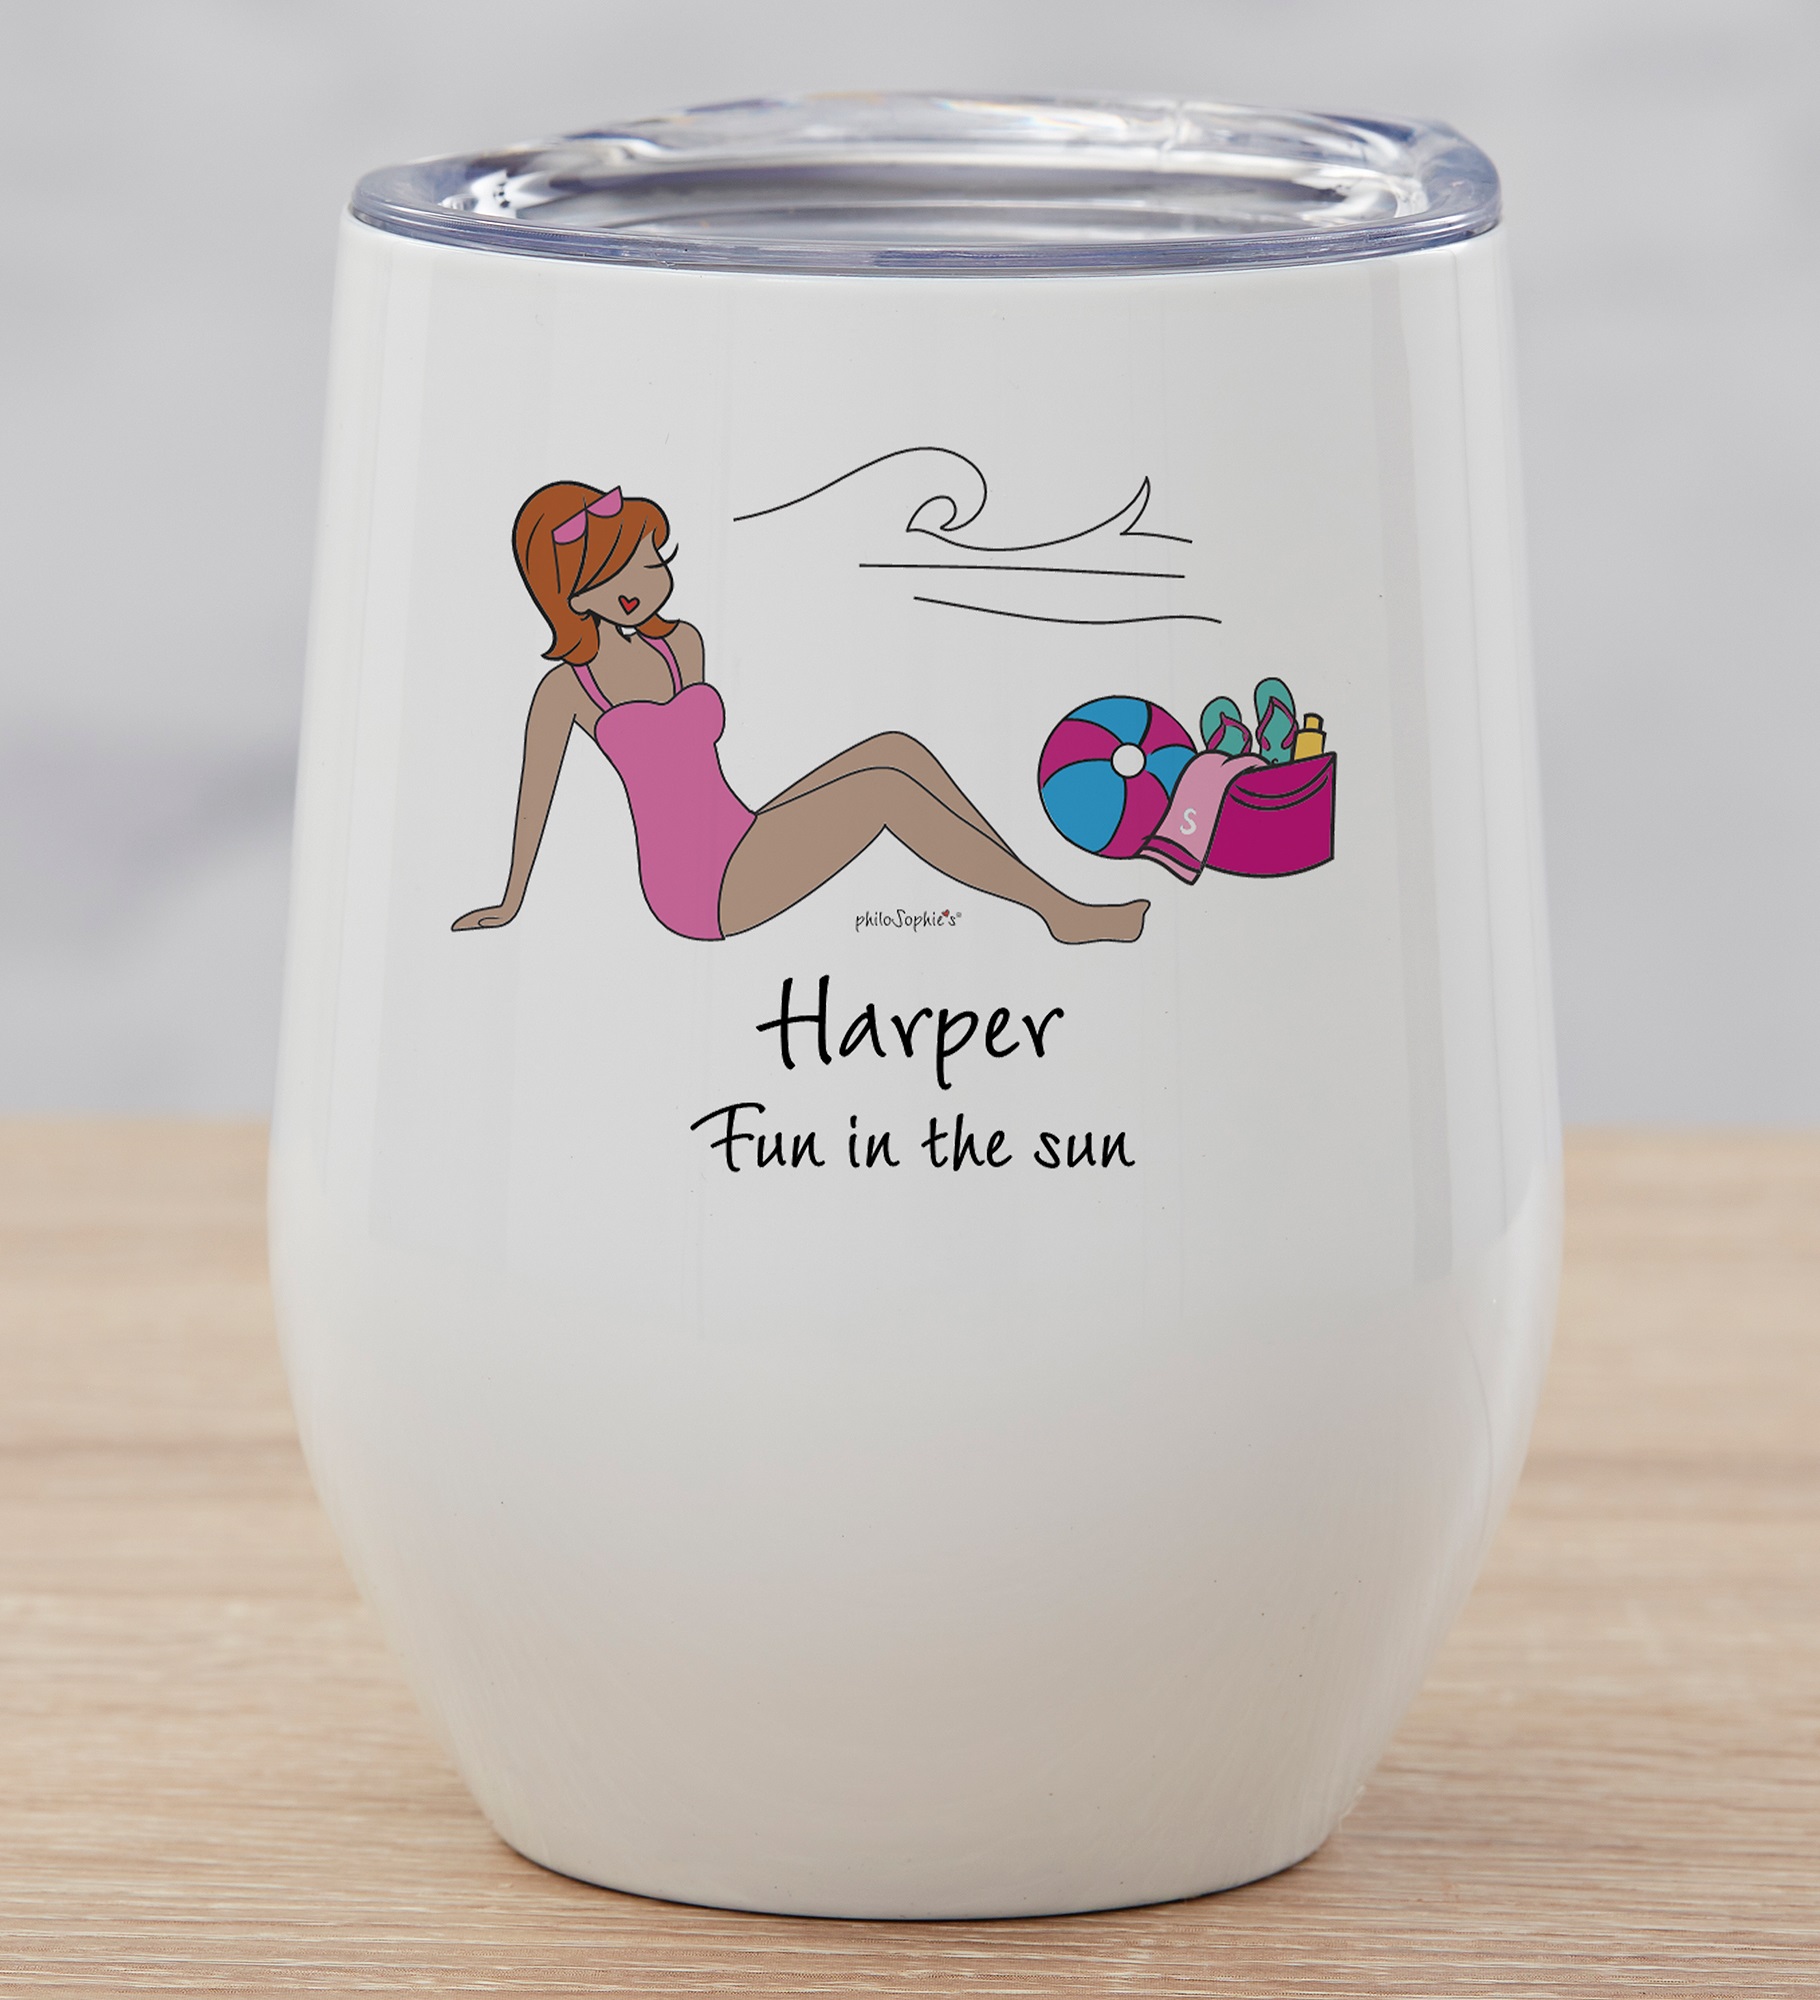 philoSophie's® Summer Personalized Stainless Insulated Wine Cup 